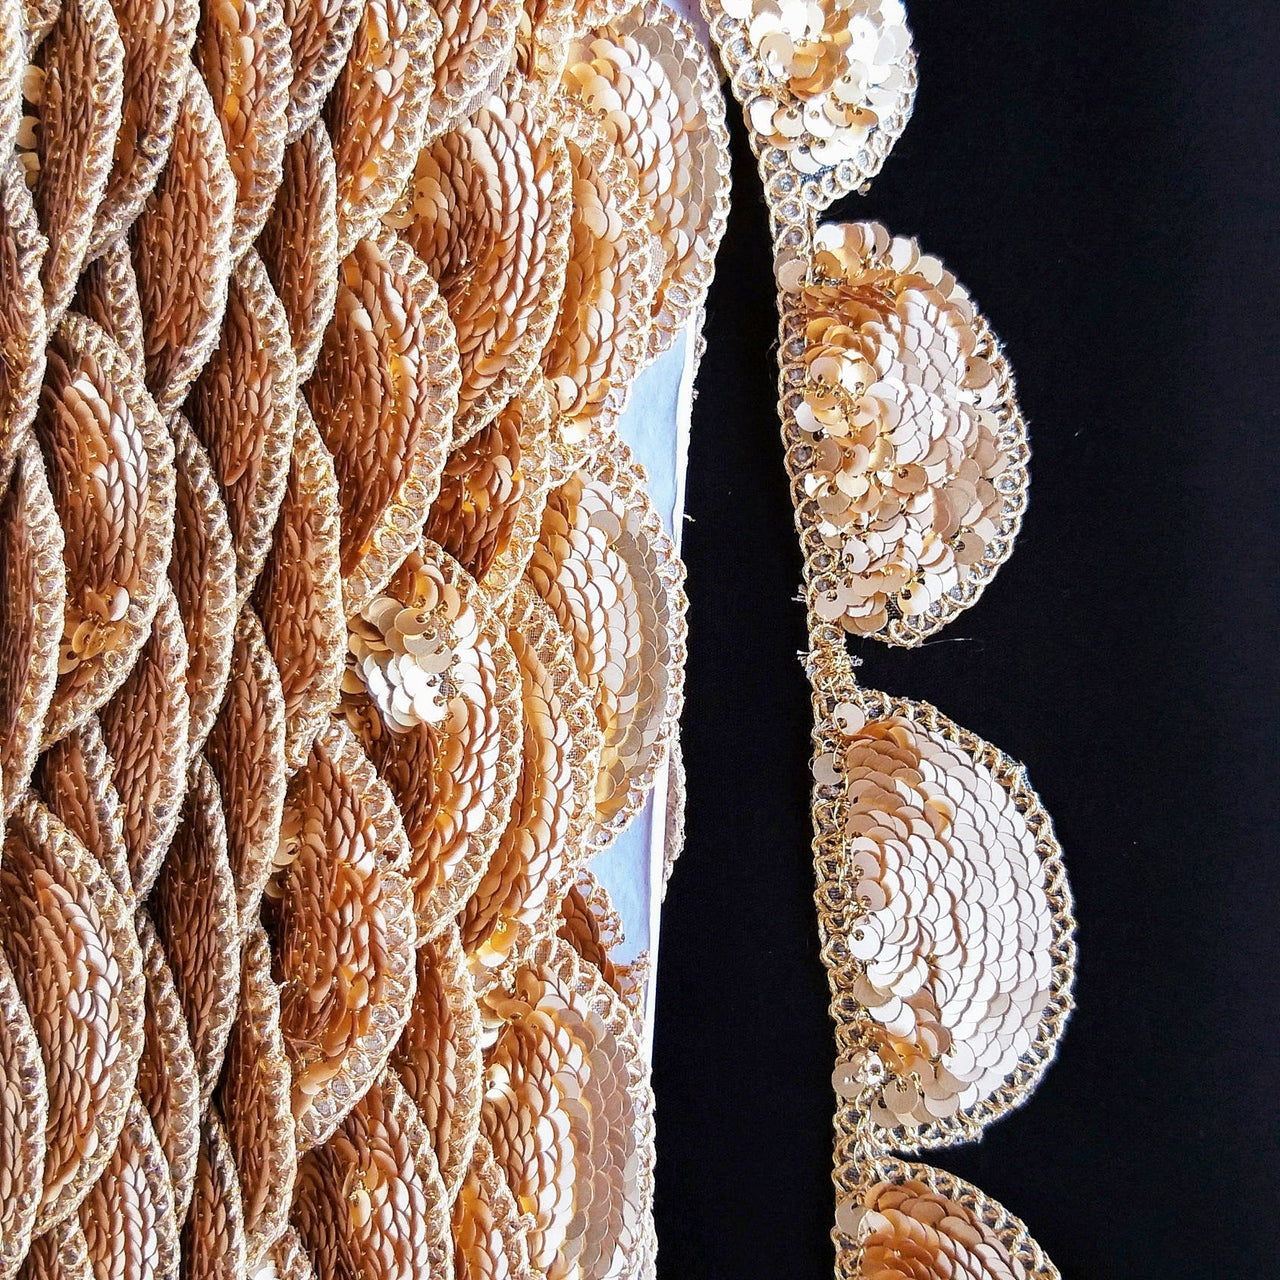 Gold Scallop Trim Embroidered With Beaded Gold Sequins, Approx. 35mm Wide - 210119L451